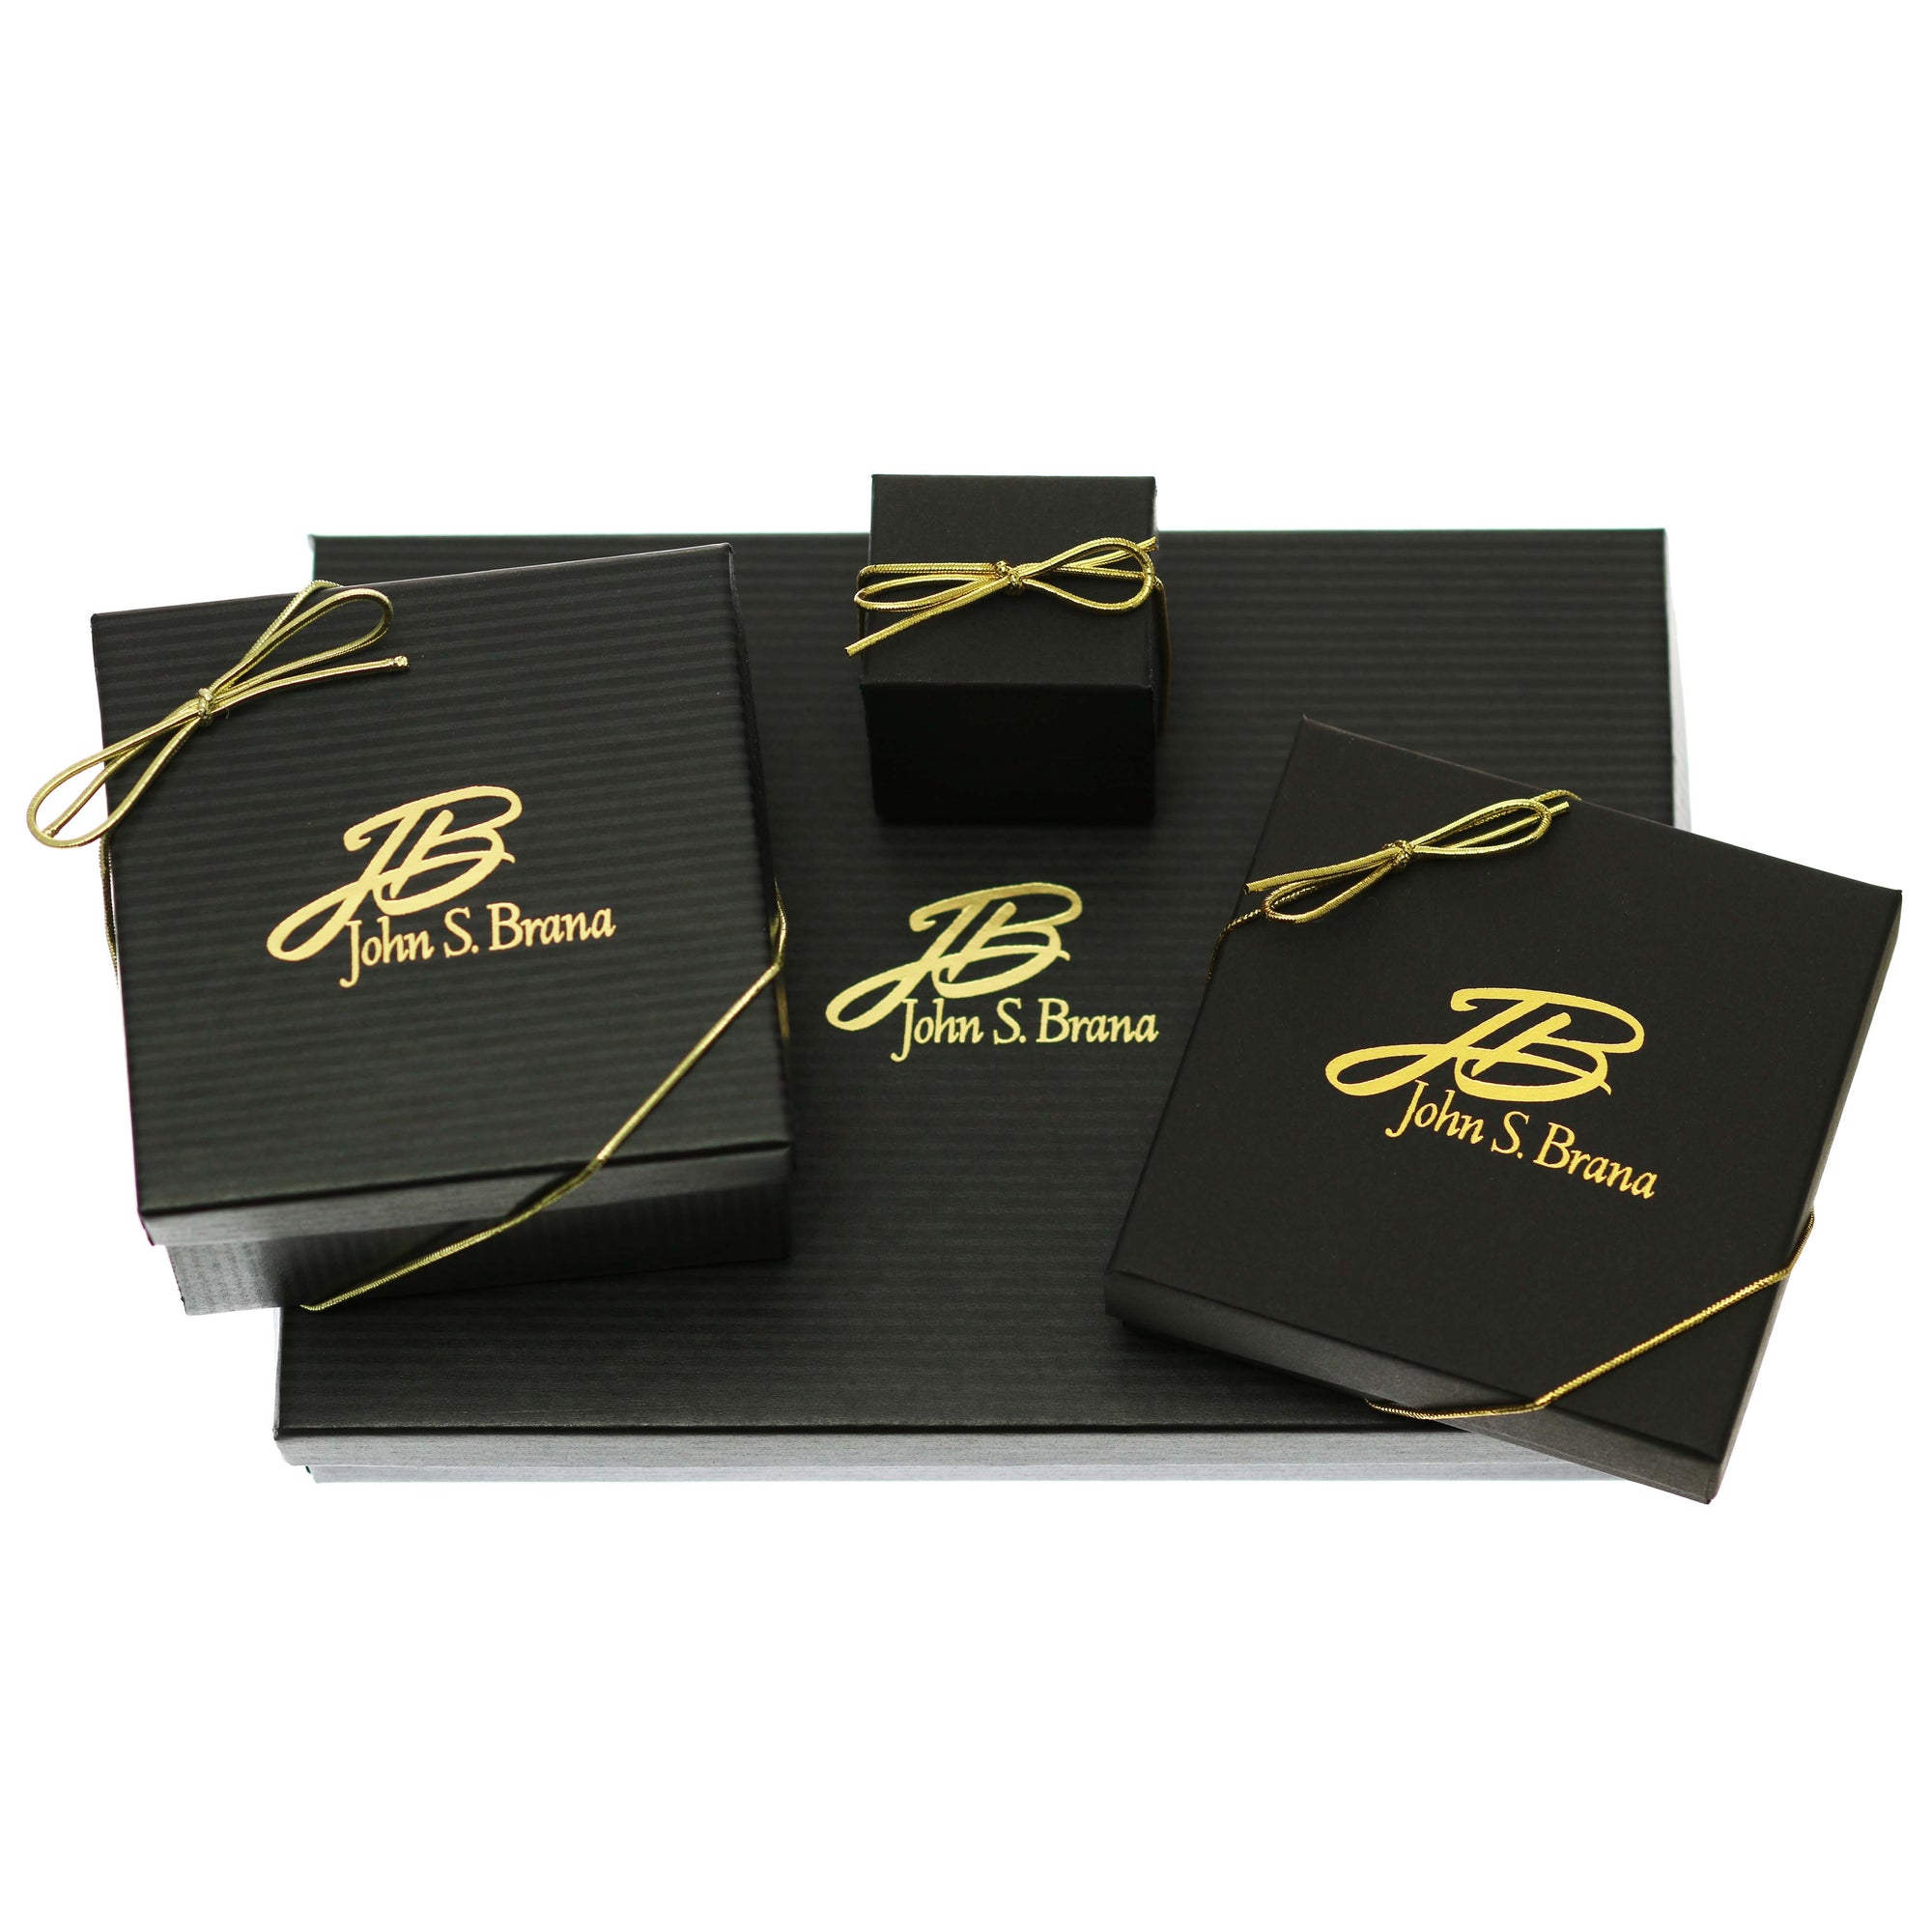 John S. Brana Gift Boxes with gold ribbon and a gold logo. Perfect for gifting or adding a touch of elegance.